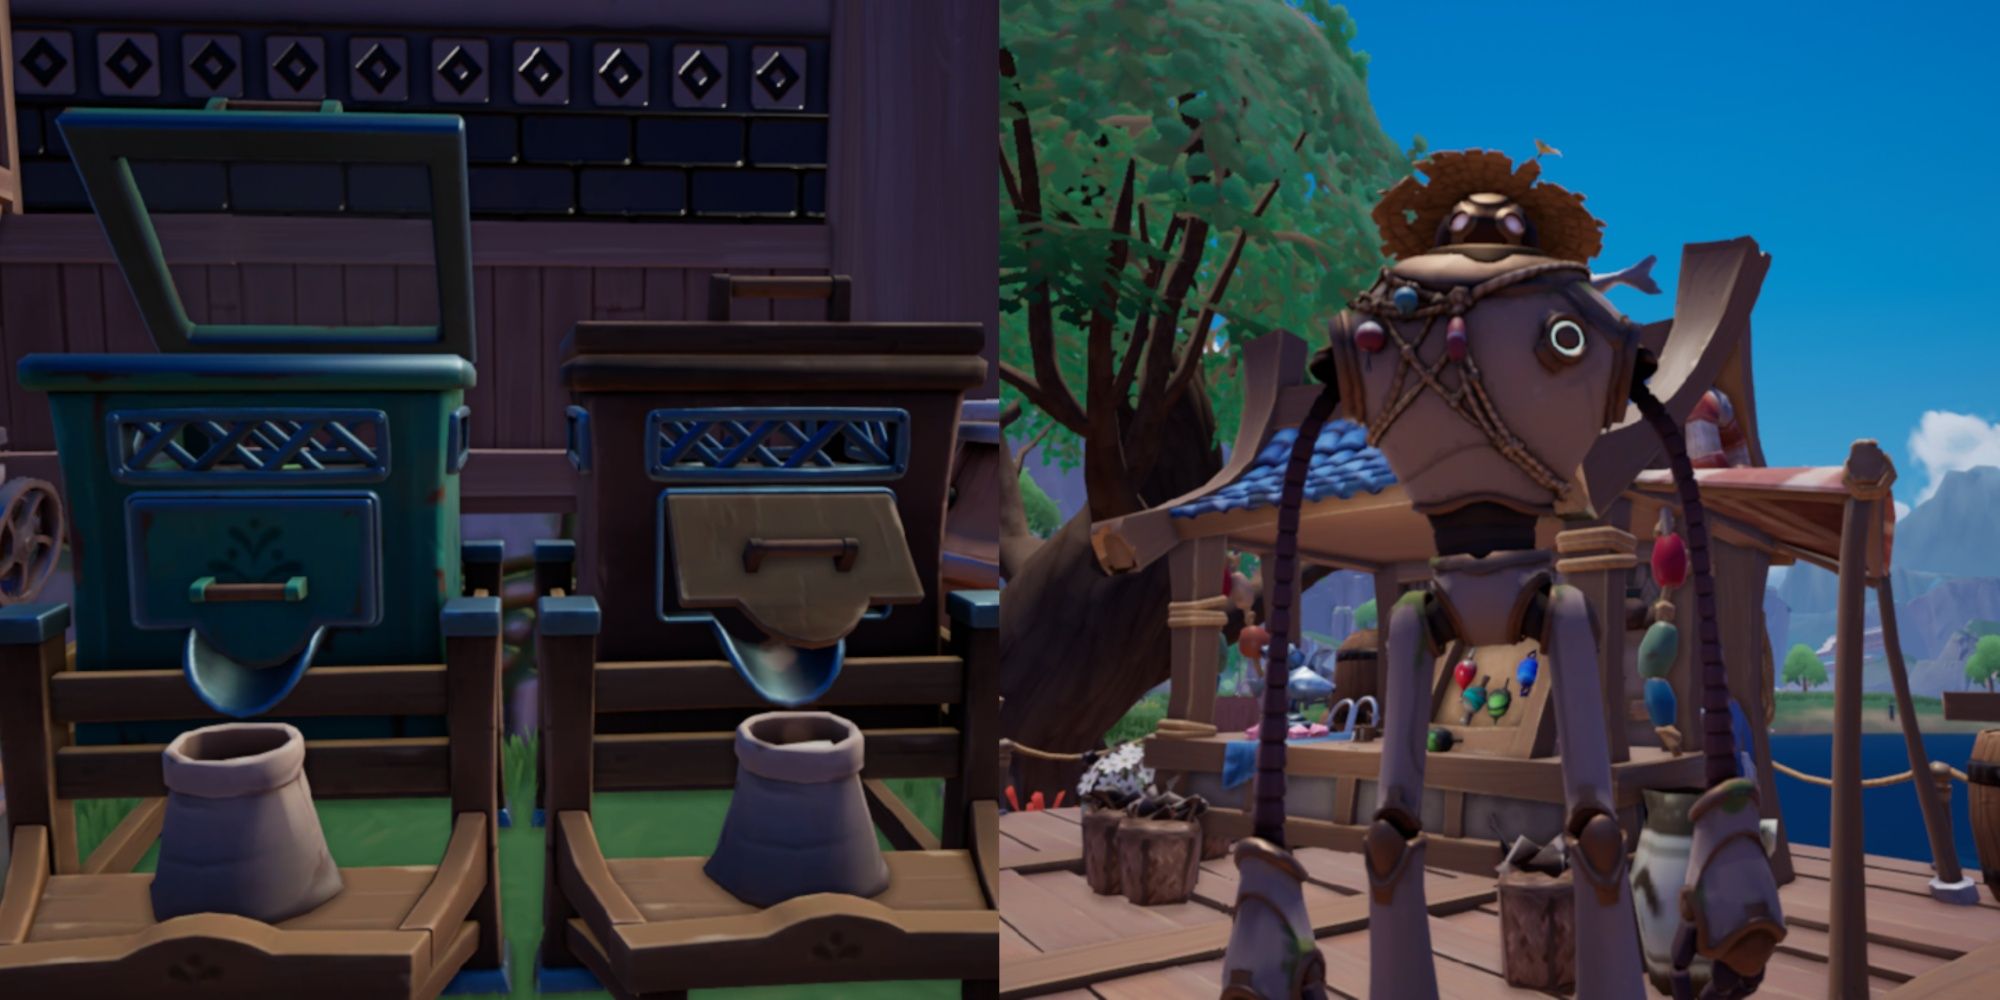 Split image featuring a Glow Worm Farm and a regular Worm Farm side-by-side and Einar standing near his fishing hut shop in the daytime in Palia.